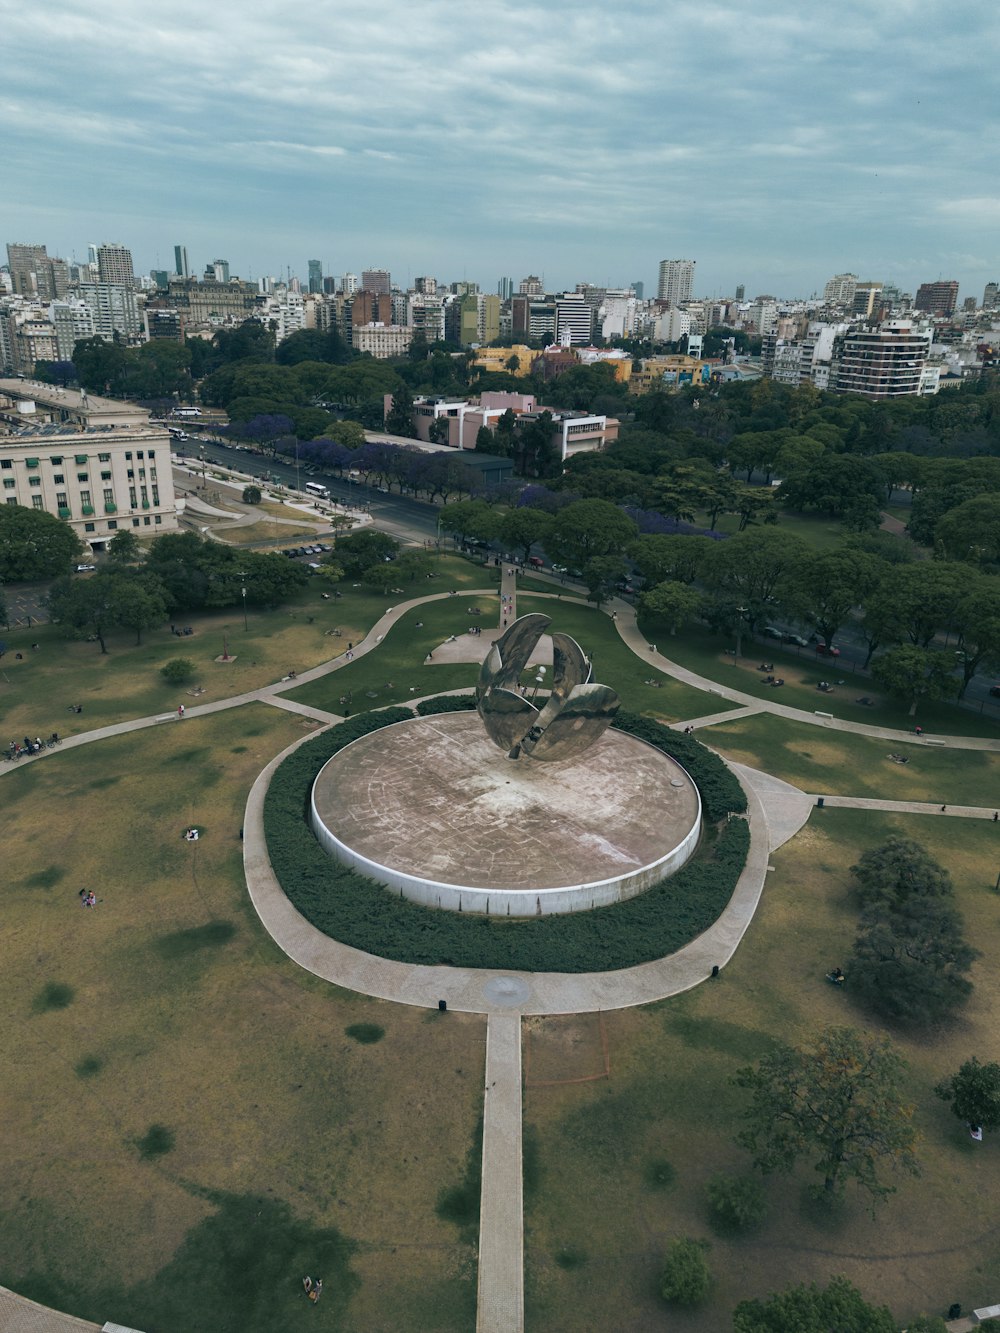 an aerial view of a park with a statue in the center